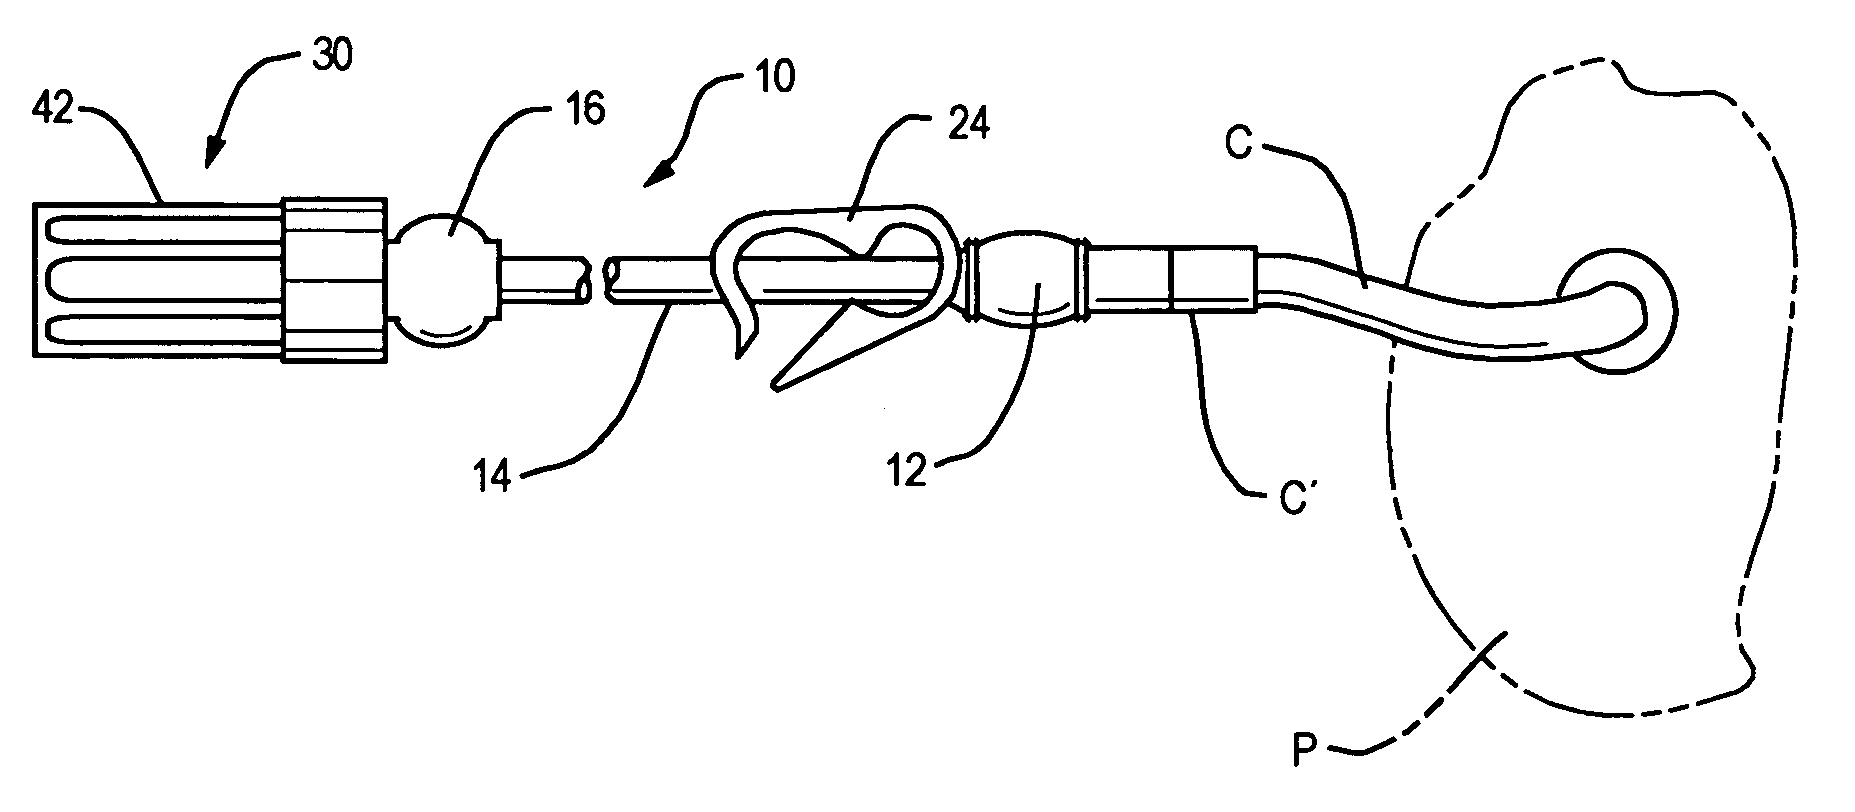 Catheter extension set and closure assembly therefor